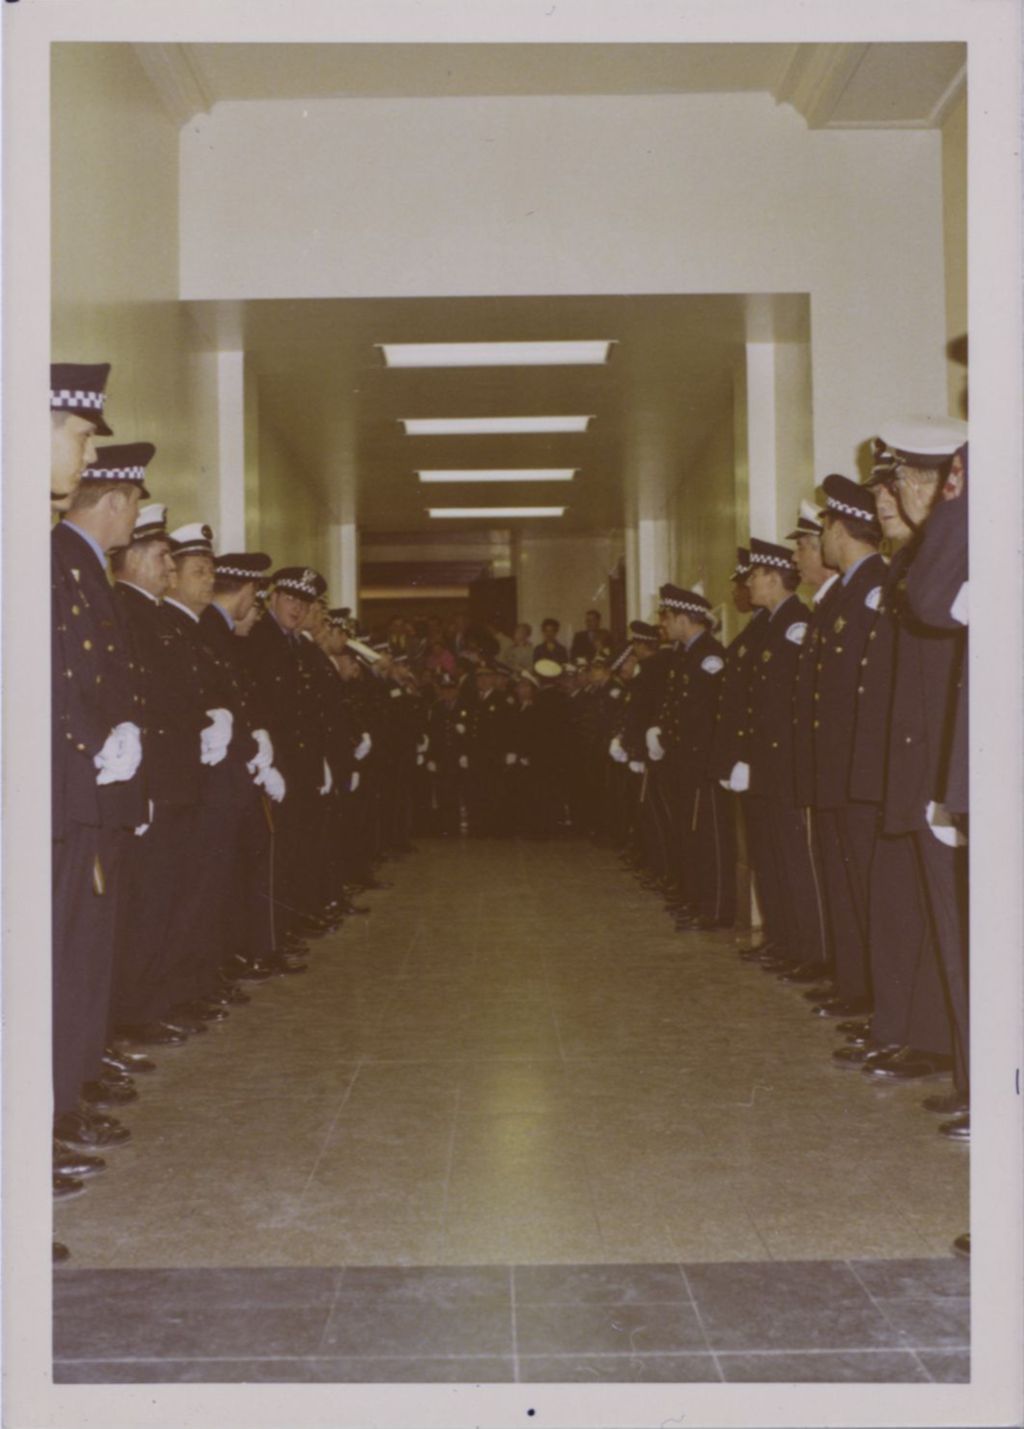 Fifth mayoral inauguration of Richard J. Daley, Chicago Police officers